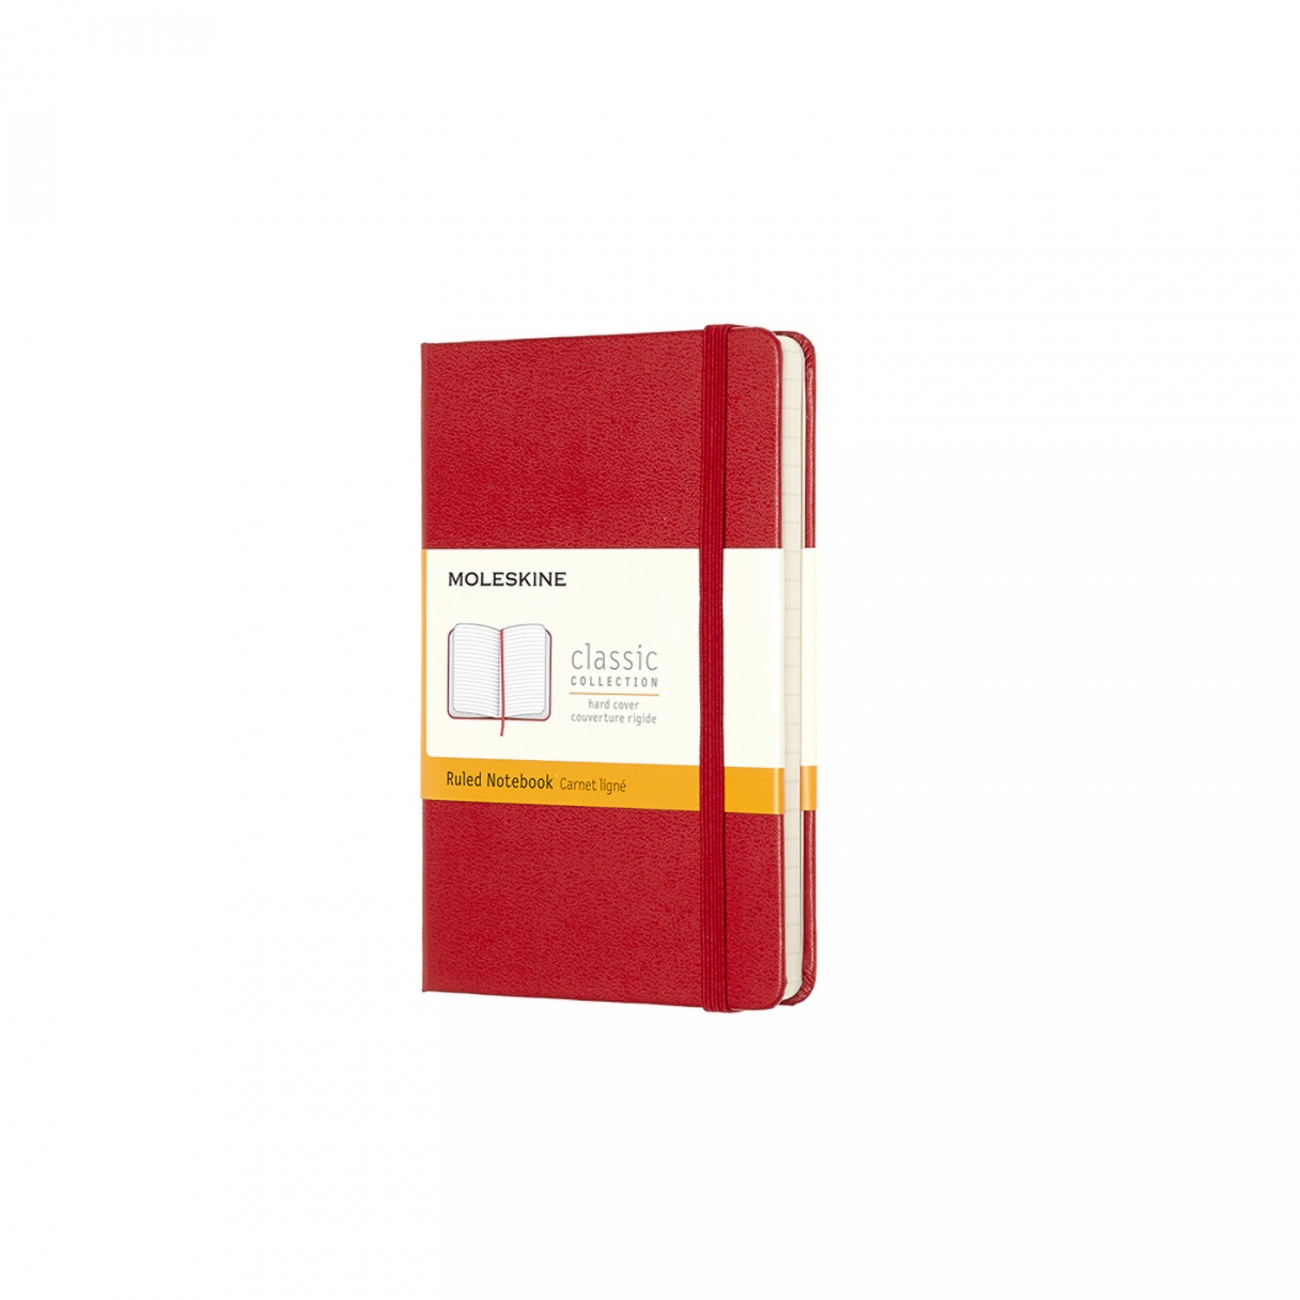 CLASSIC HARD COVER NOTEBOOK - RULED - POCKET - SCARLET RED